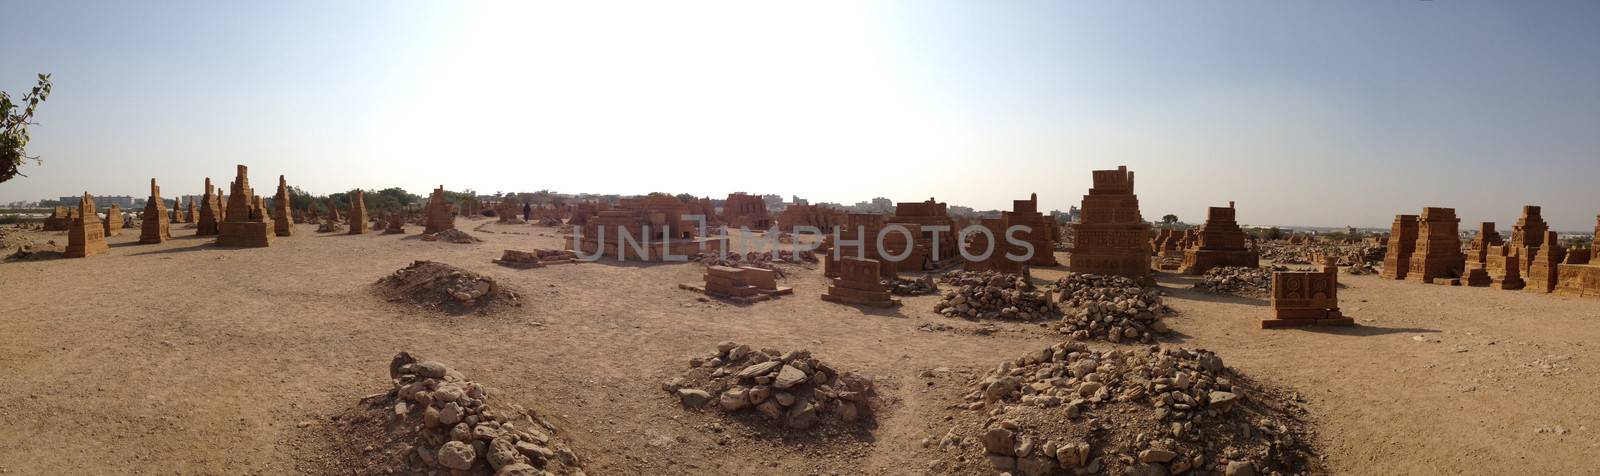 Panoramic view of an ancient cemetery of the 15th Century, in Sindh, Pakistan